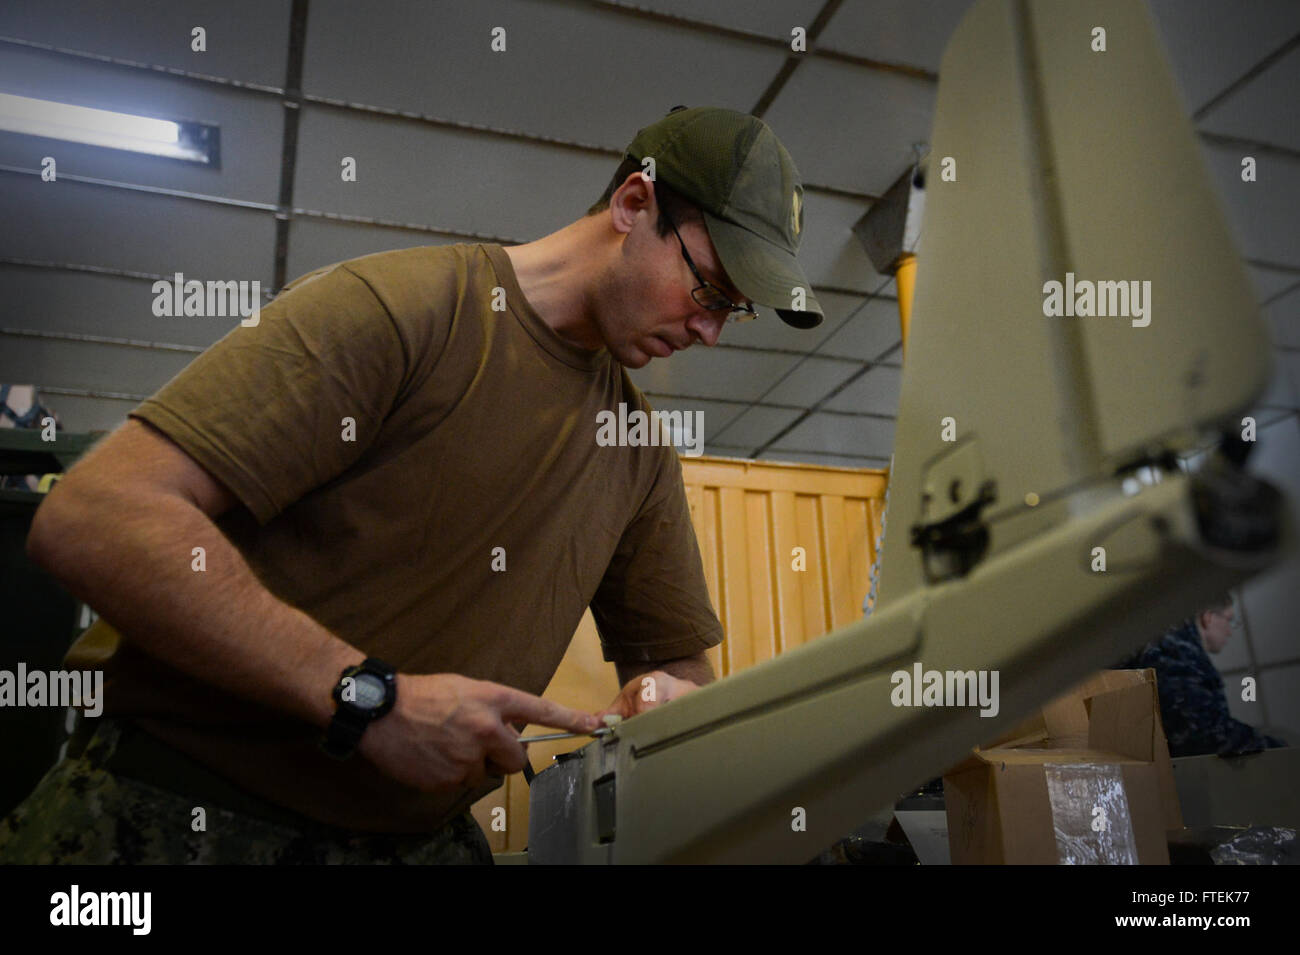 150110-N-RB579-032 ATLANTIC OCEAN (Jan. 10, 2015) Intelligence Specialist 2nd Class Joshua Lesperance conducts routine maintenance on the small unmanned aircraft system RQ-20A Aqua Puma aboard USNS Spearhead (JHSV 1), Jan. 10, 2015. Spearhead is on a scheduled deployment in the U.S. 6th Fleet area of operations to support the international collaborative capacity-building program Africa Partnership Station. (U.S. Navy photo by Mass Communication Specialist 1st Class Joshua Davies/Released) Stock Photo